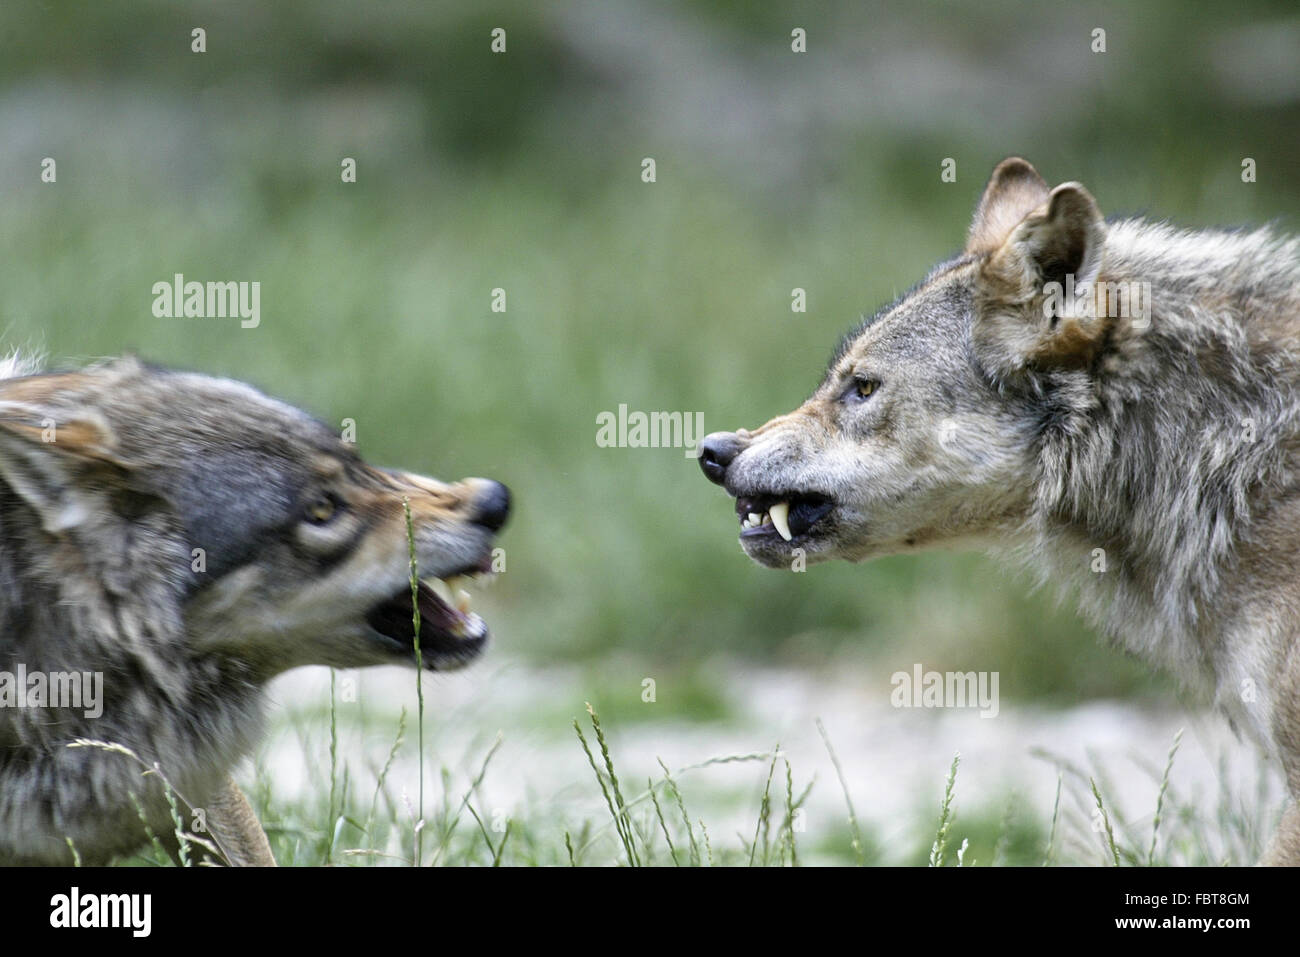 WOLF/CANIS LUPUS Stock Photo